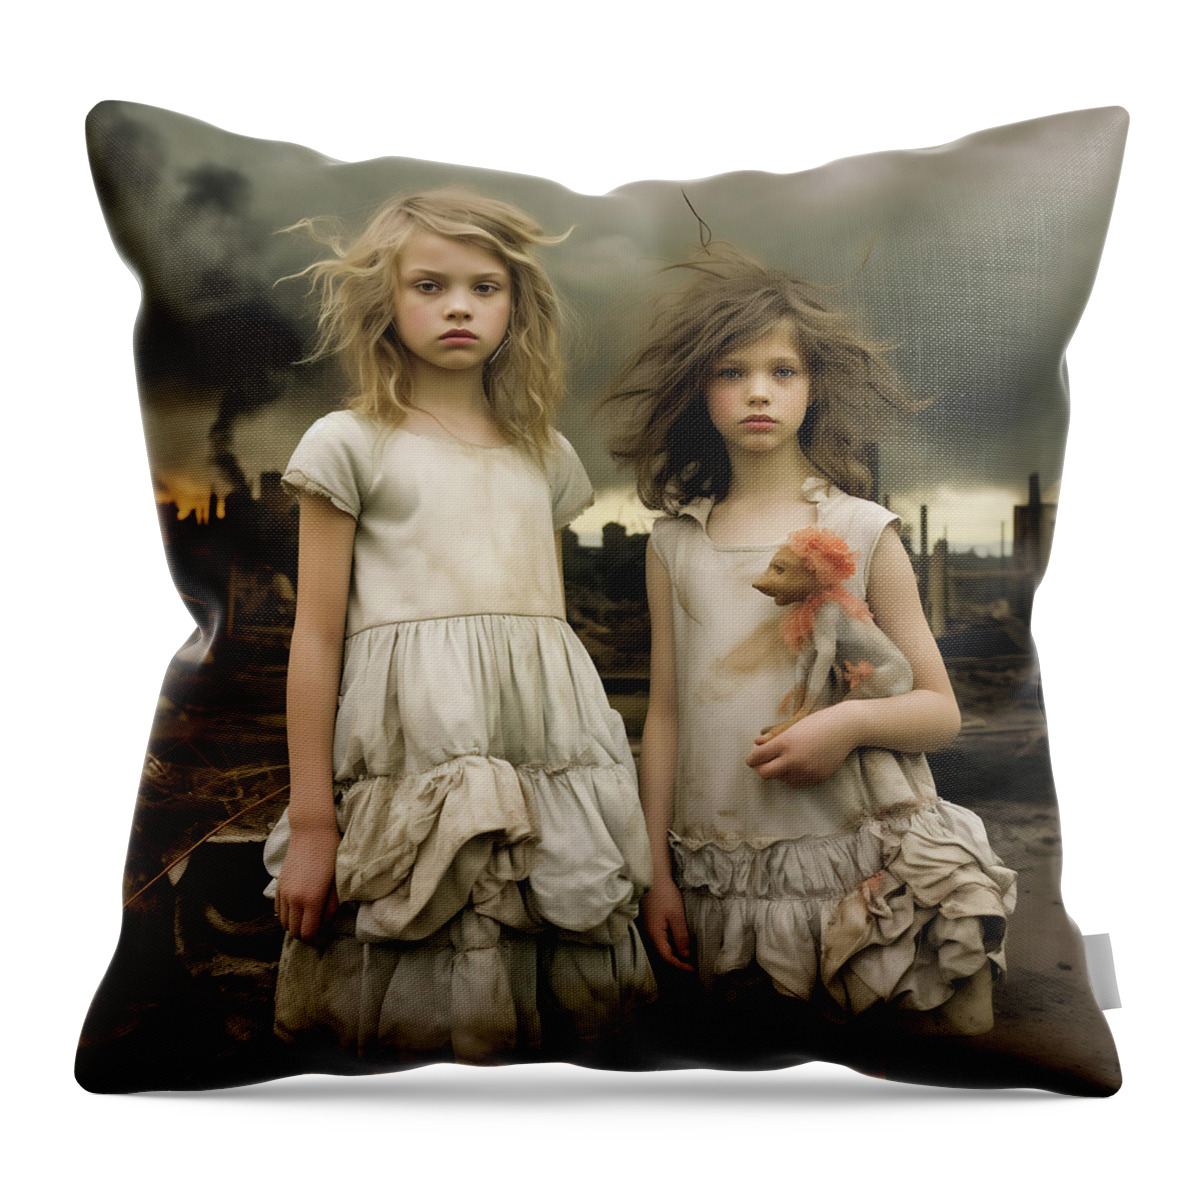 Suffering Throw Pillow featuring the digital art The Real Picture of War by Robert Knight